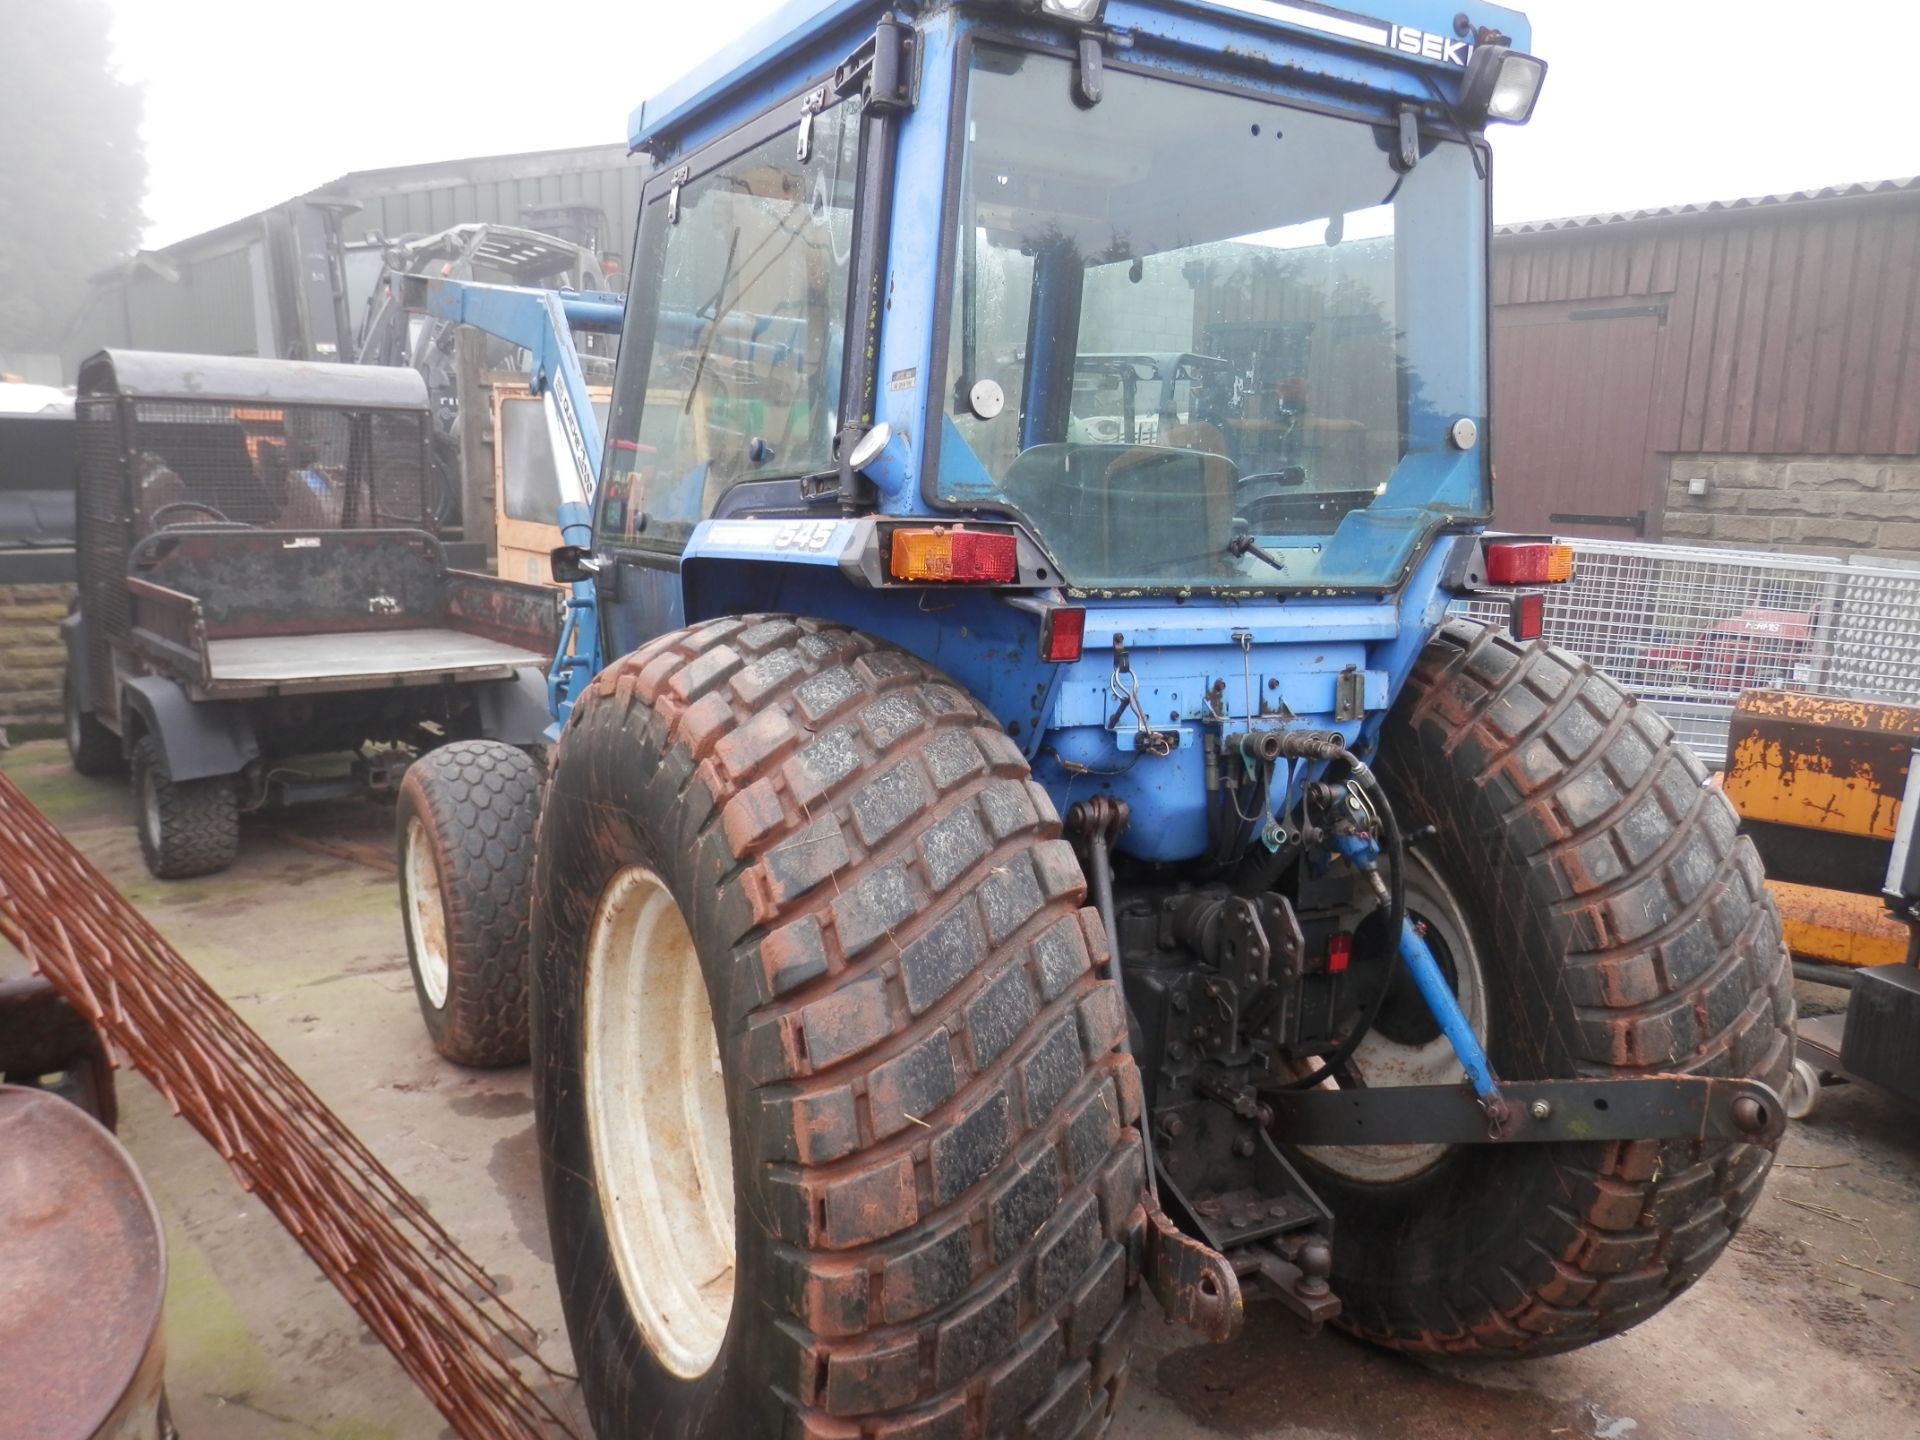 DS - ISEKI 545 TRACTOR WITH FRONT LOADER. GOOD WORKING UNIT.   DIESEL ENGINED MID SIZED TRACTOR. - Image 2 of 7